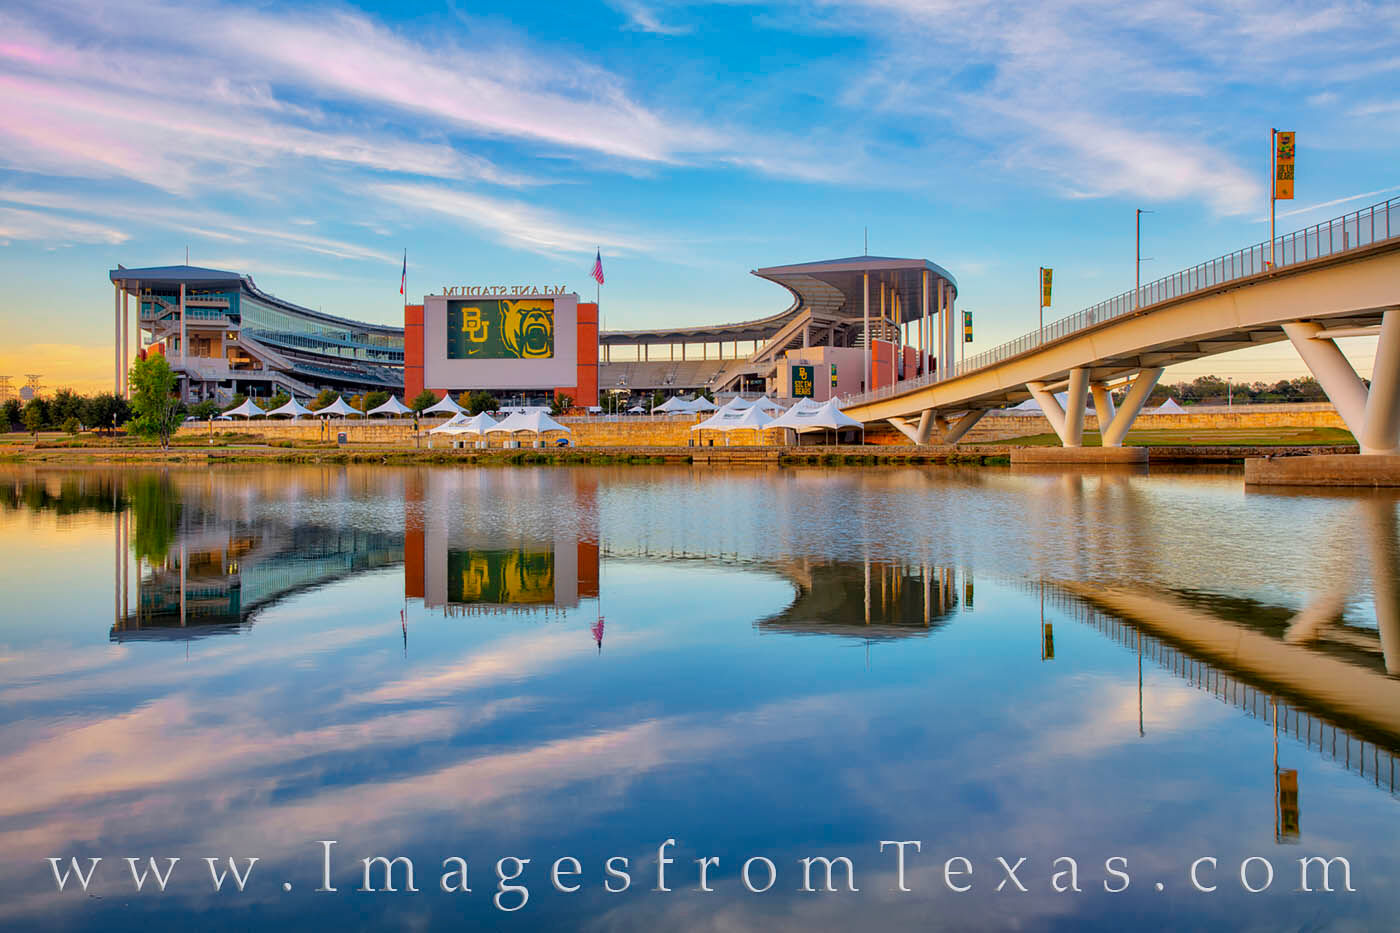 The Sheila and Walter Umphrey Pedestrian Bridge connects the Baylor University campus with McLane Stadium as it crosses the Brazos...